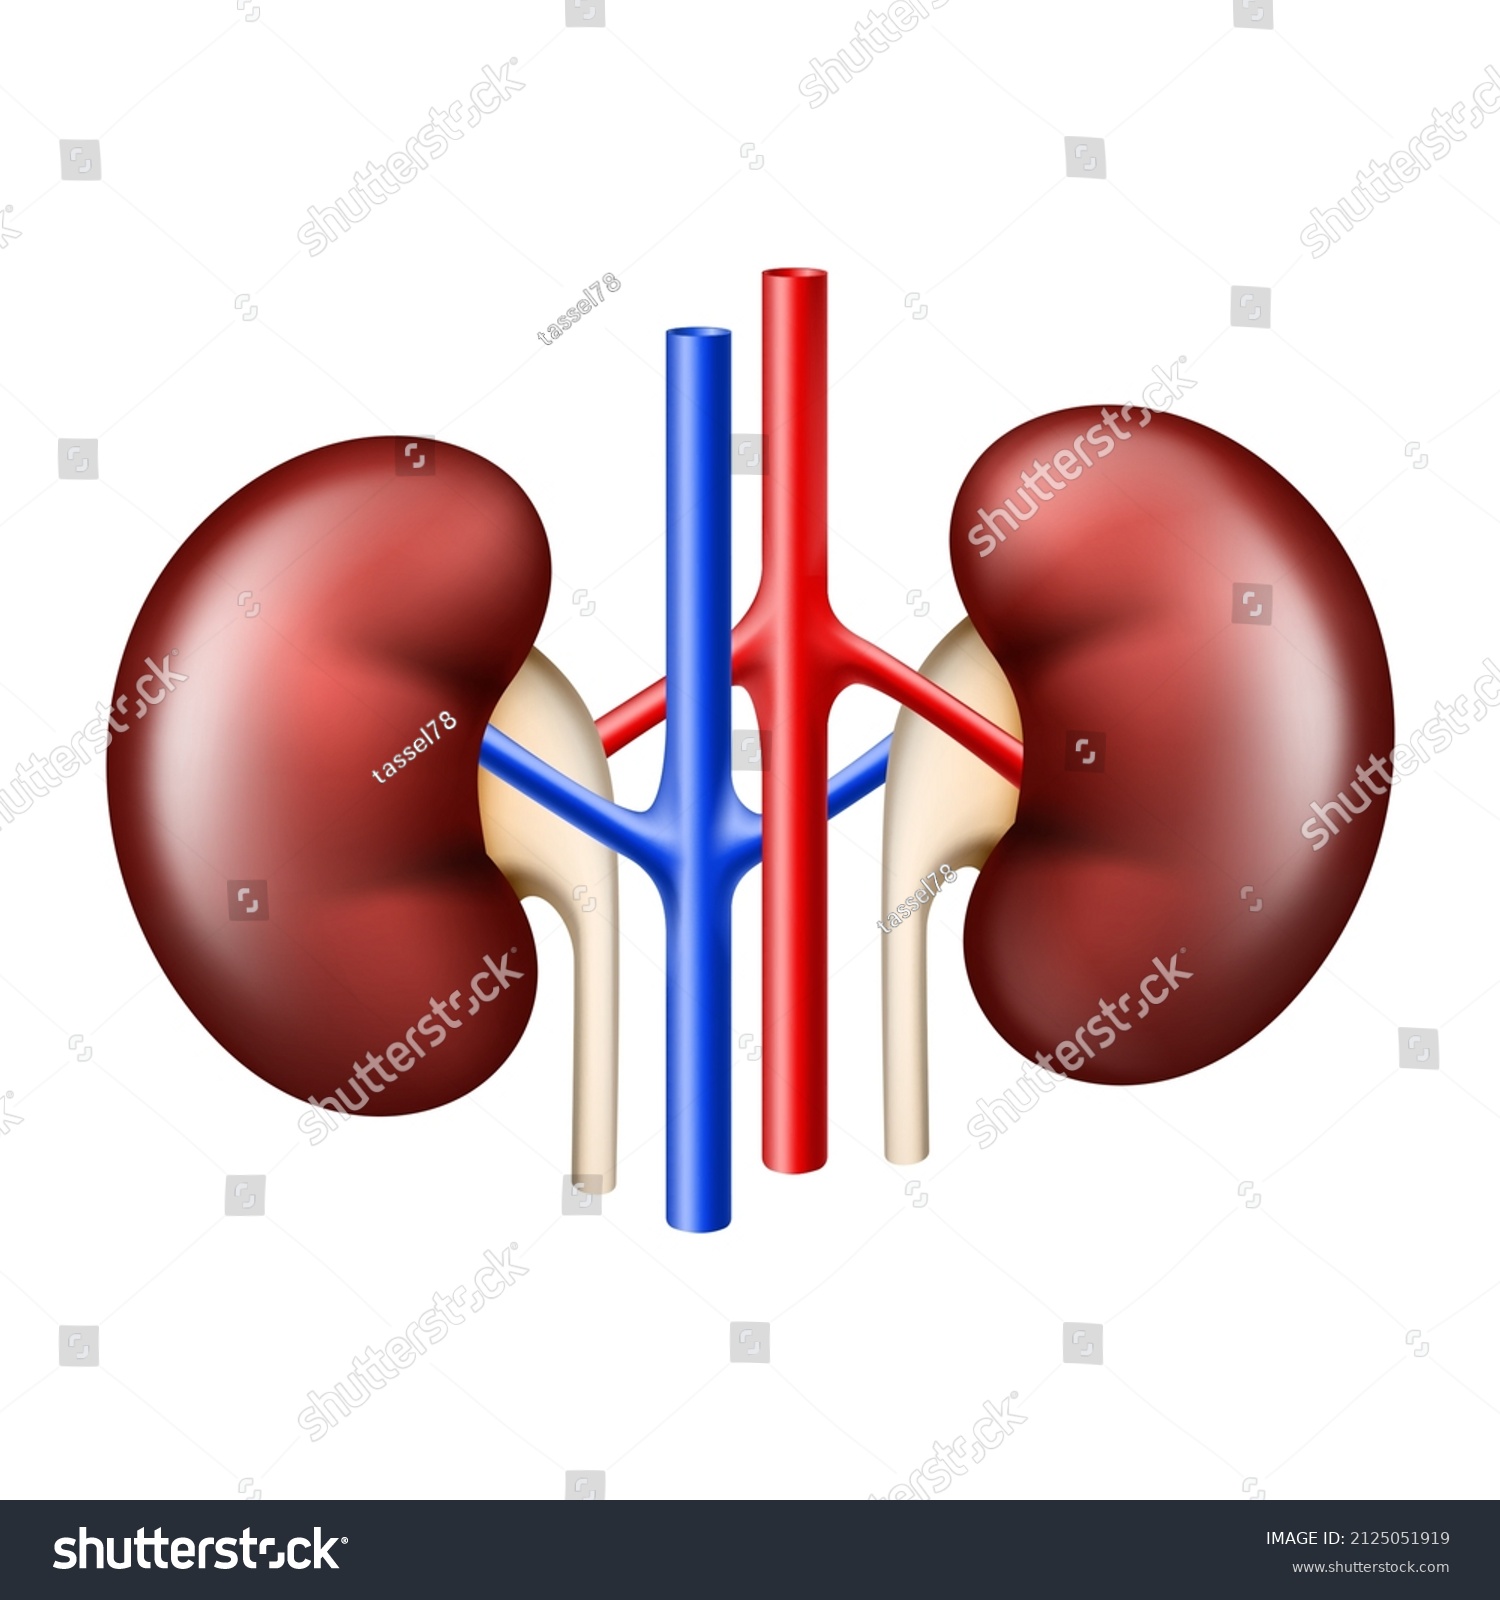 Realistic Kidney Anatomy Structure Urinary System Stock Vector (Royalty ...